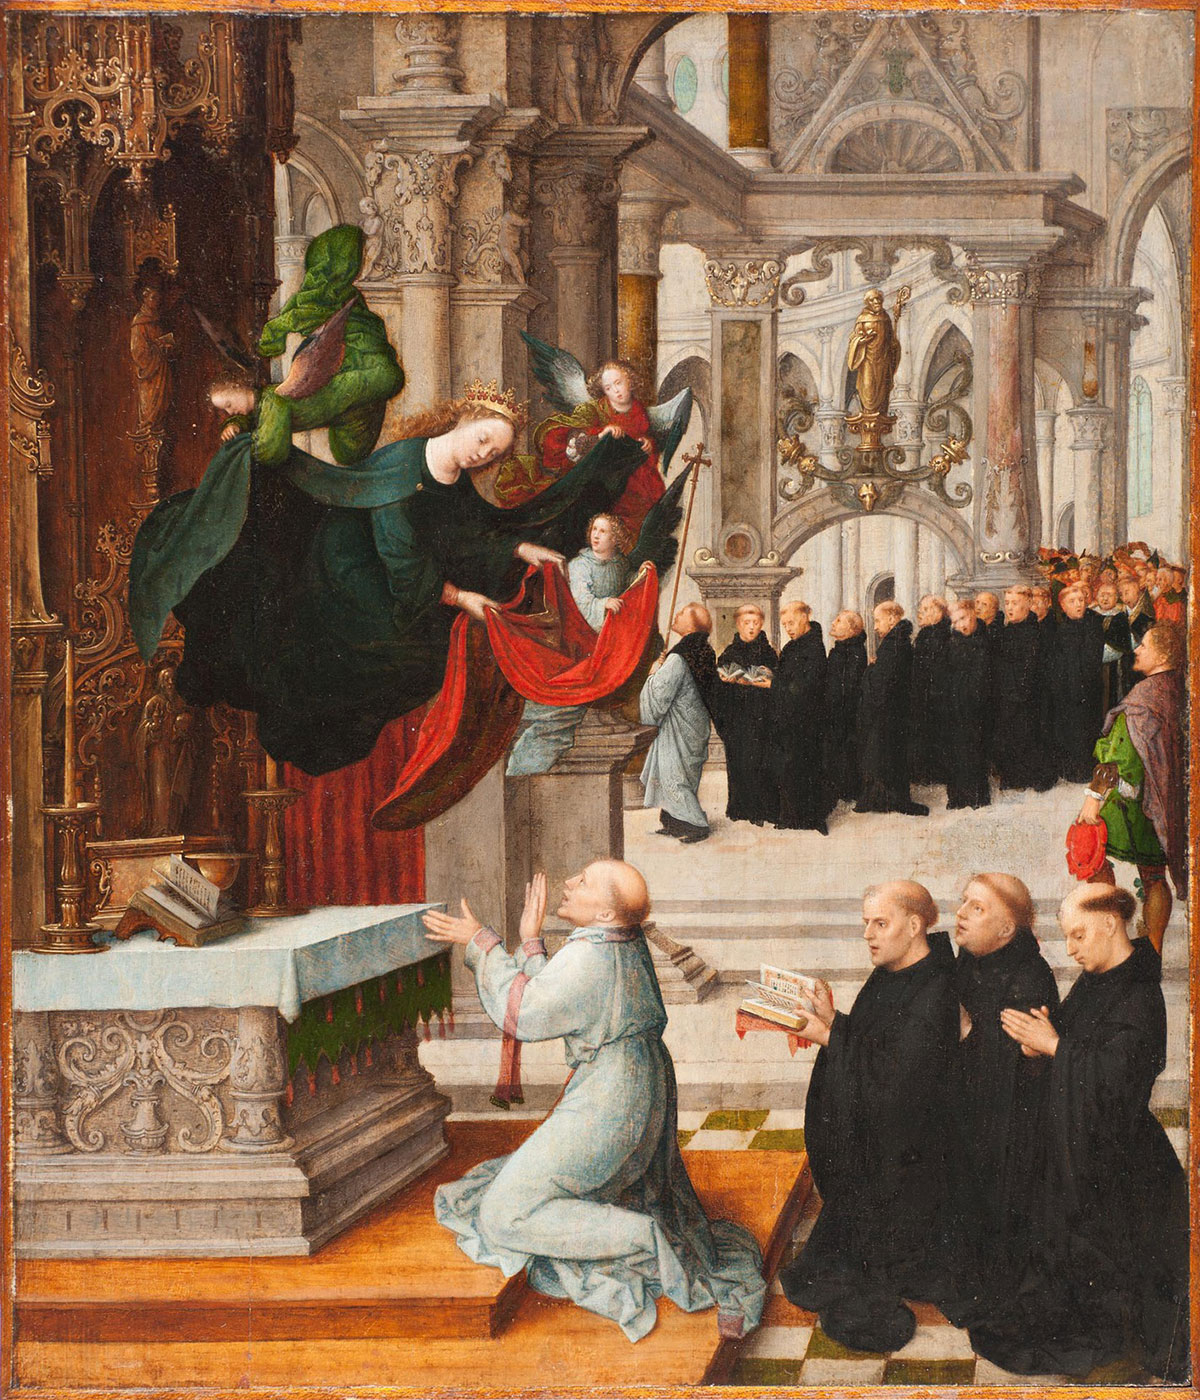 A grand church interior where a man in grey robes kneels below a flying angel. Behind him, a train of monks wearing dark robes bends over prayer books